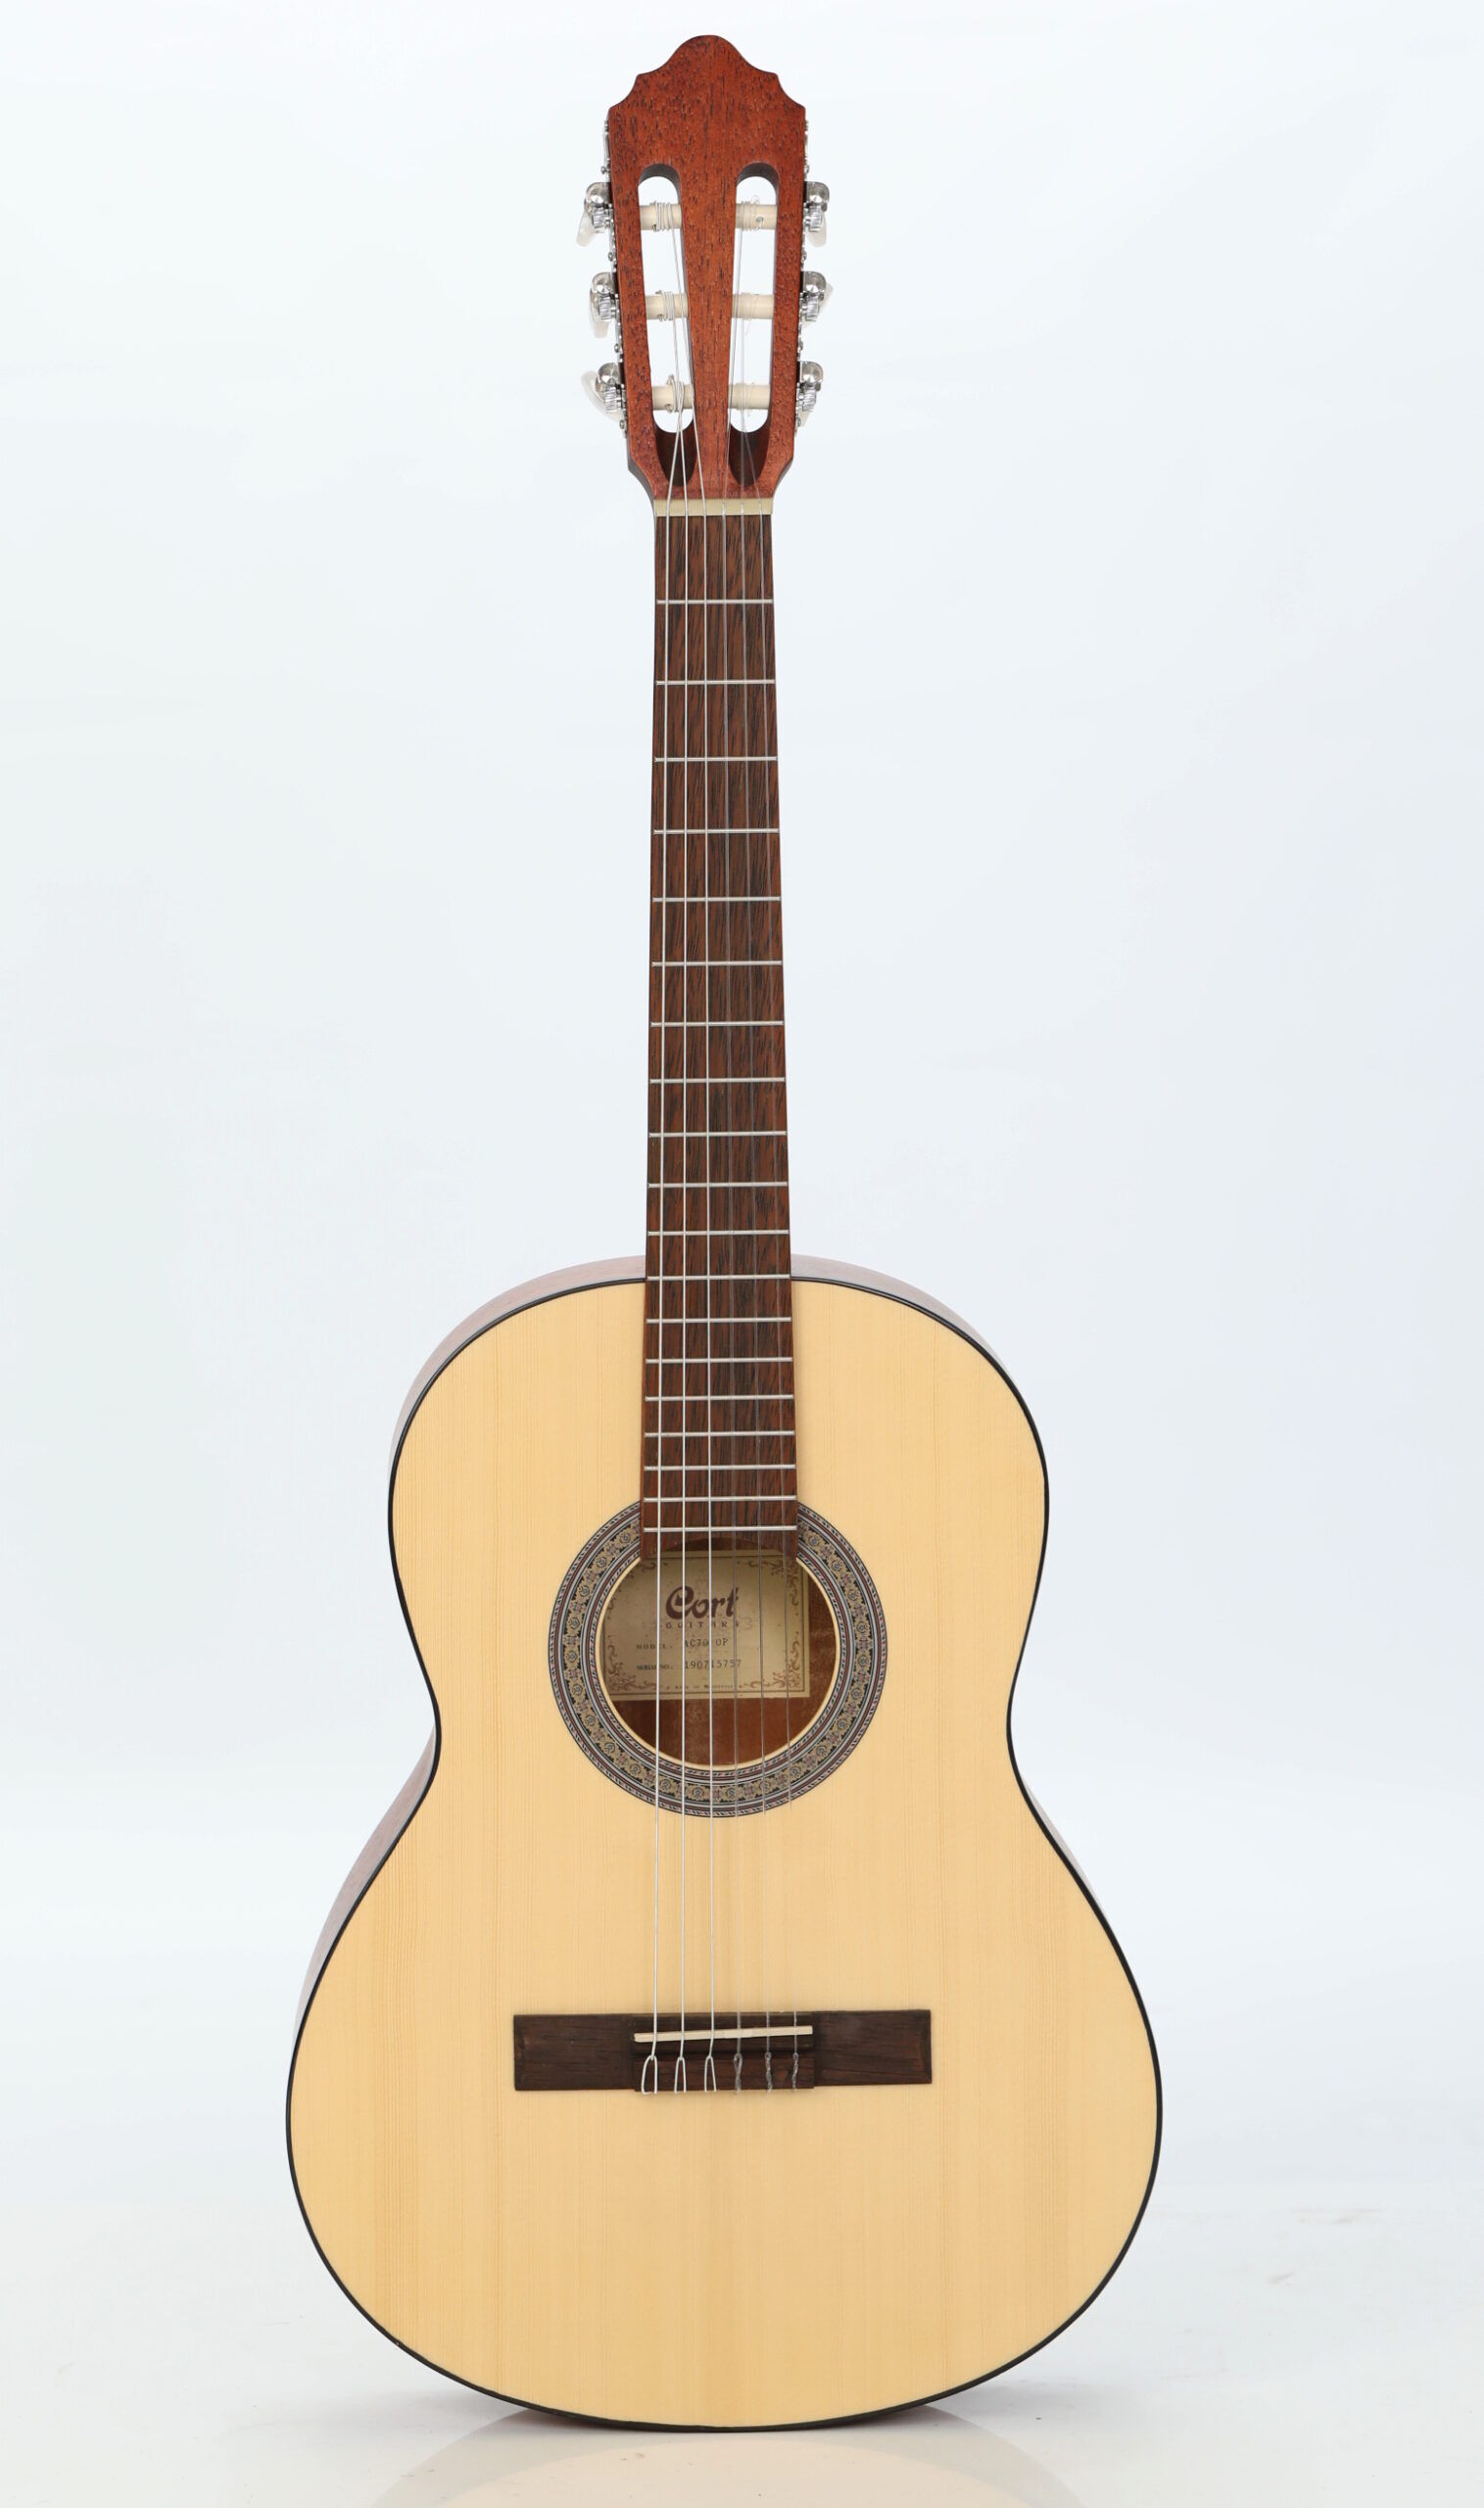 Beginner Acoustic Guitar-Cort AC 70 - A superb for a first guitar